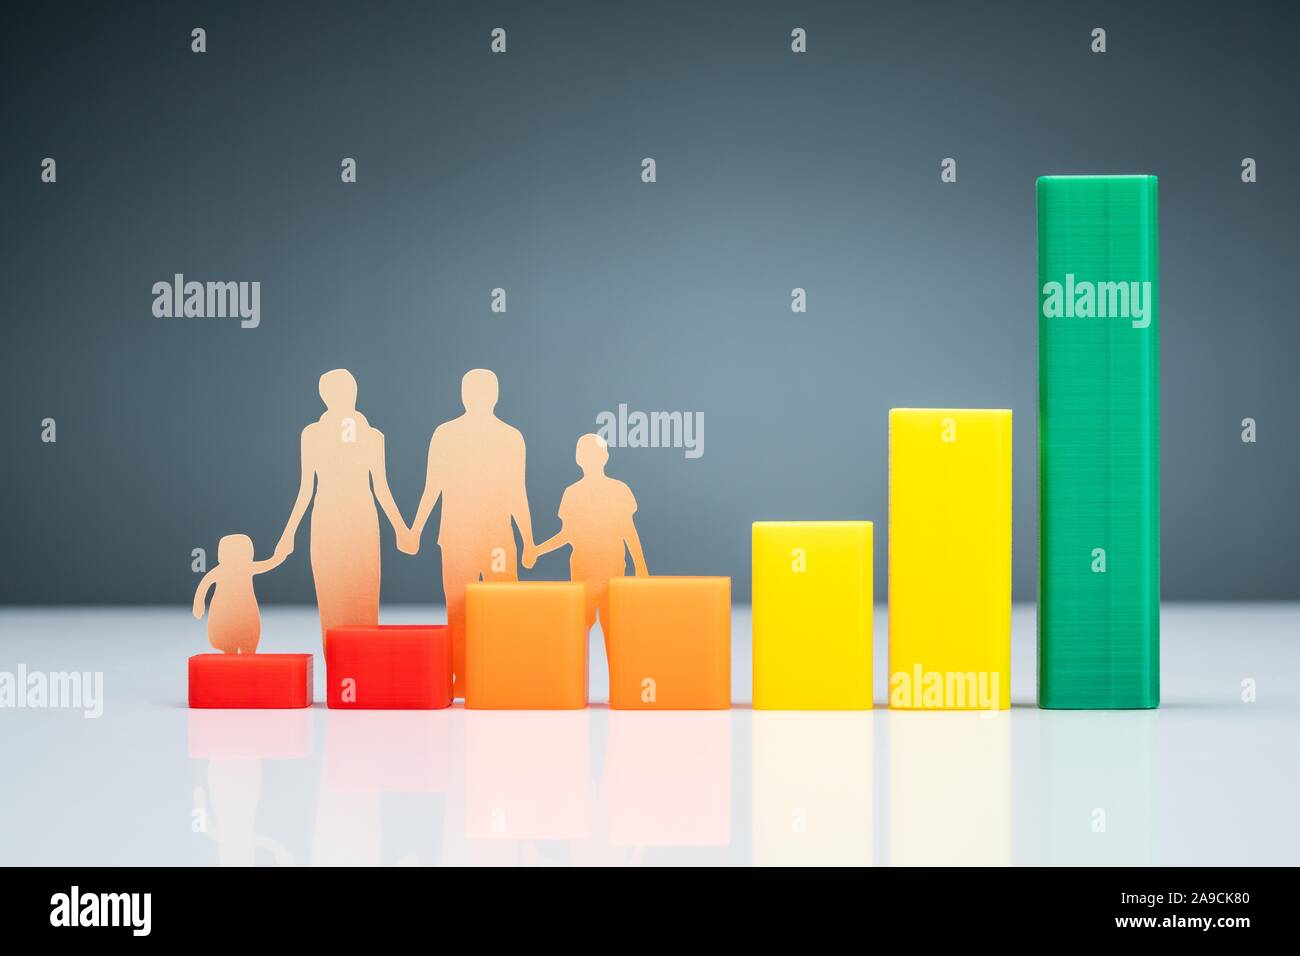 Family Cutout Paper Behind The Colorful Energy Efficiency Rating Chart On Desk Against Gray Background Stock Photo